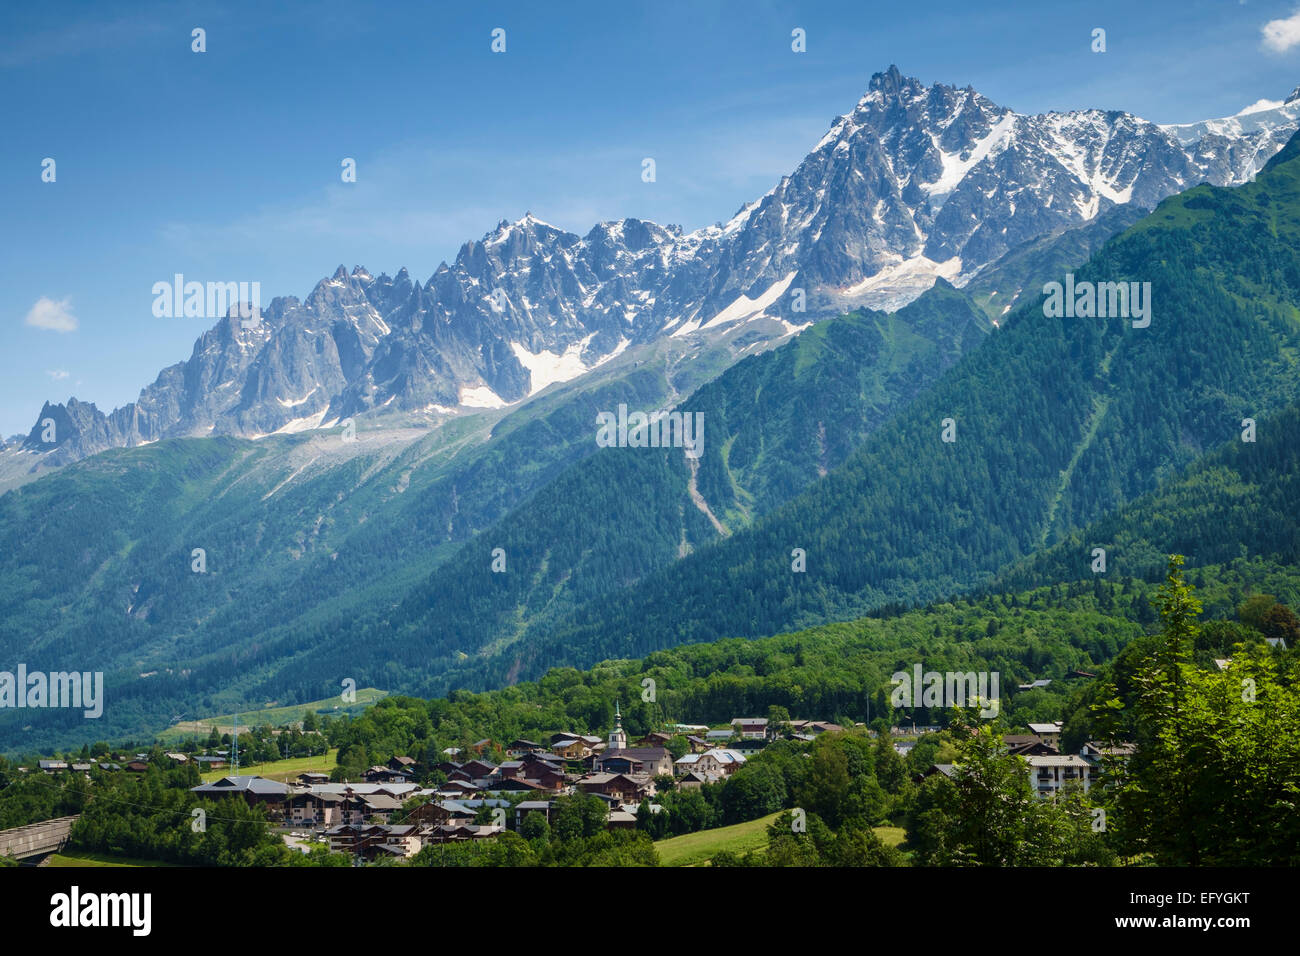 Les Houches village with the Aiguille du Midi and Aiguilles de Chamonix range behind, Chamonix Valley, french Alps, France, Europe Stock Photo